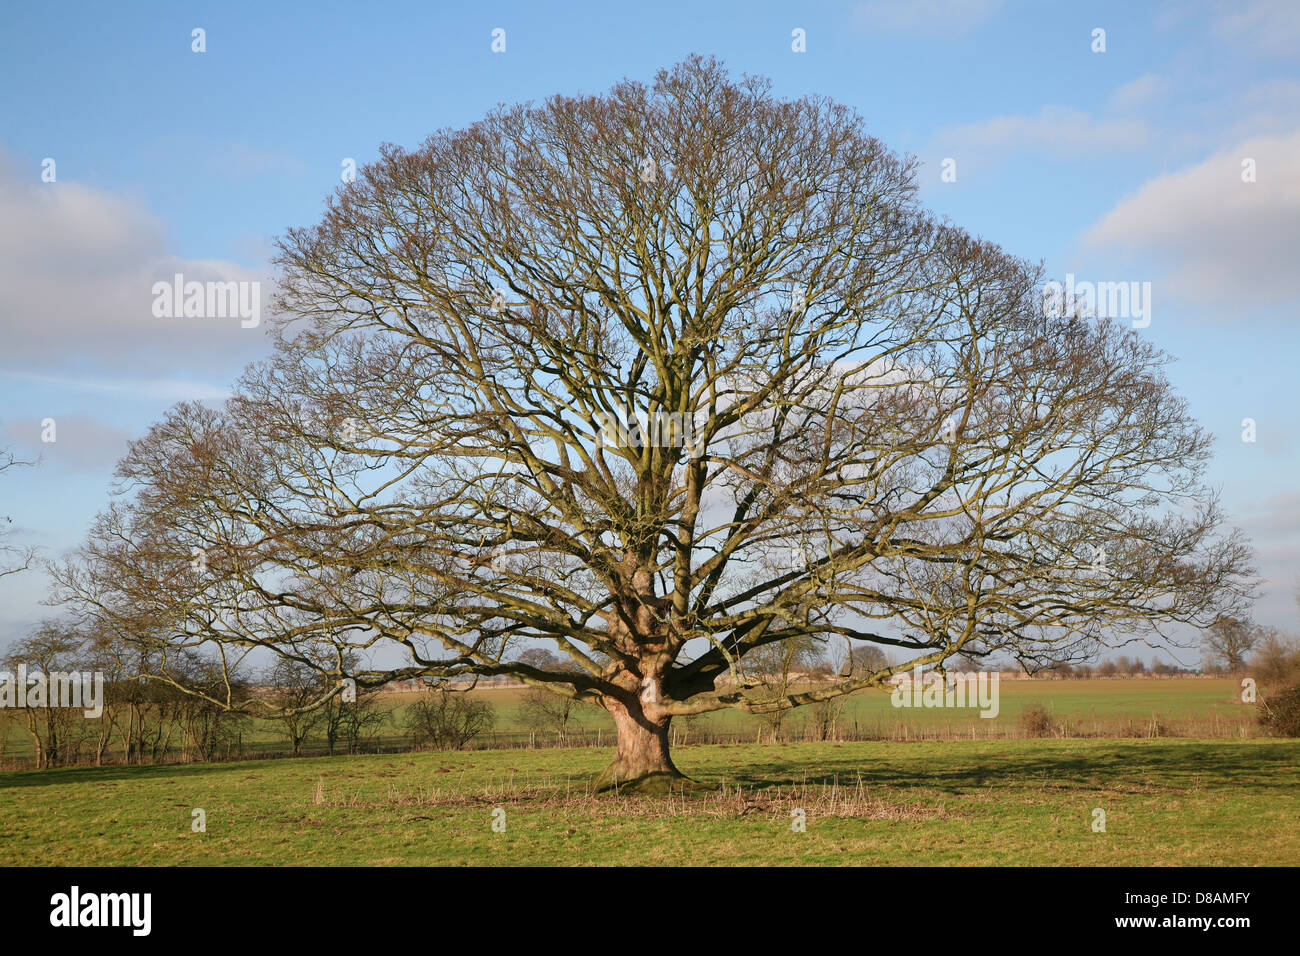 Leafless deciduous tree in winter standing in field, Sutton, Suffolk, England Stock Photo